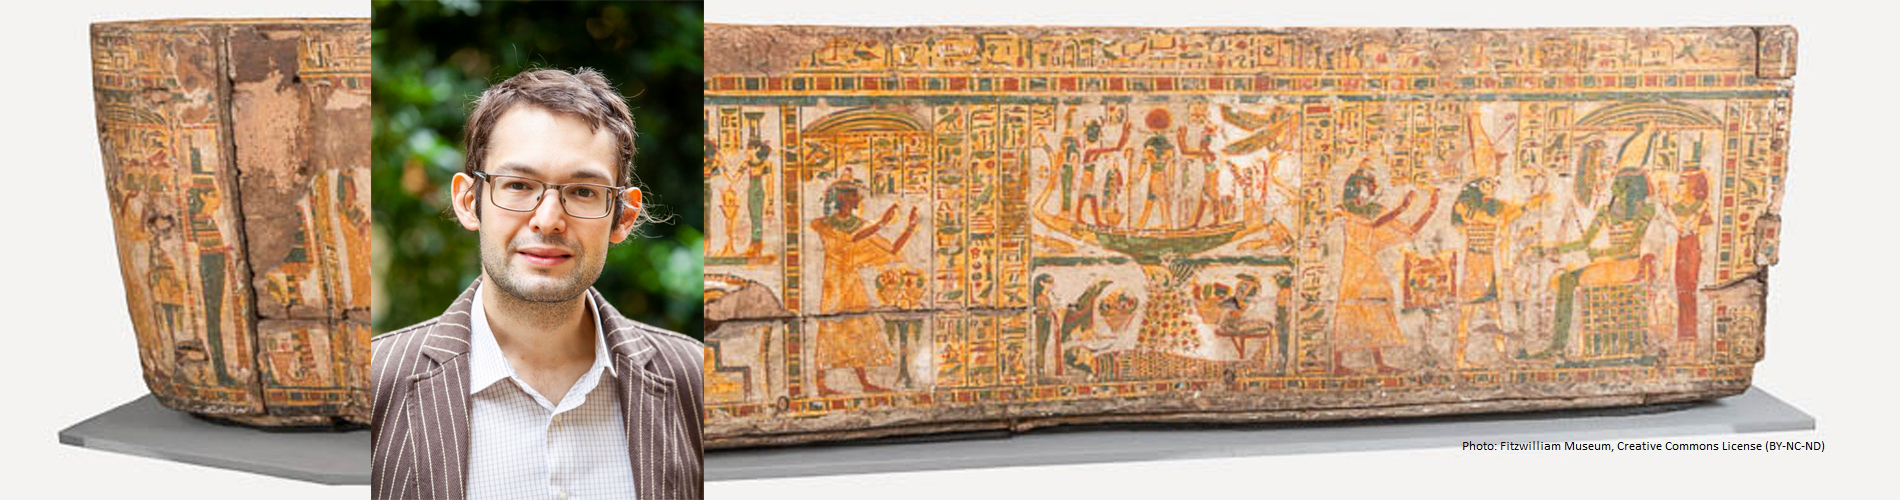 Side view of an Egyptian Coffin with headshot of Dr Loktionov